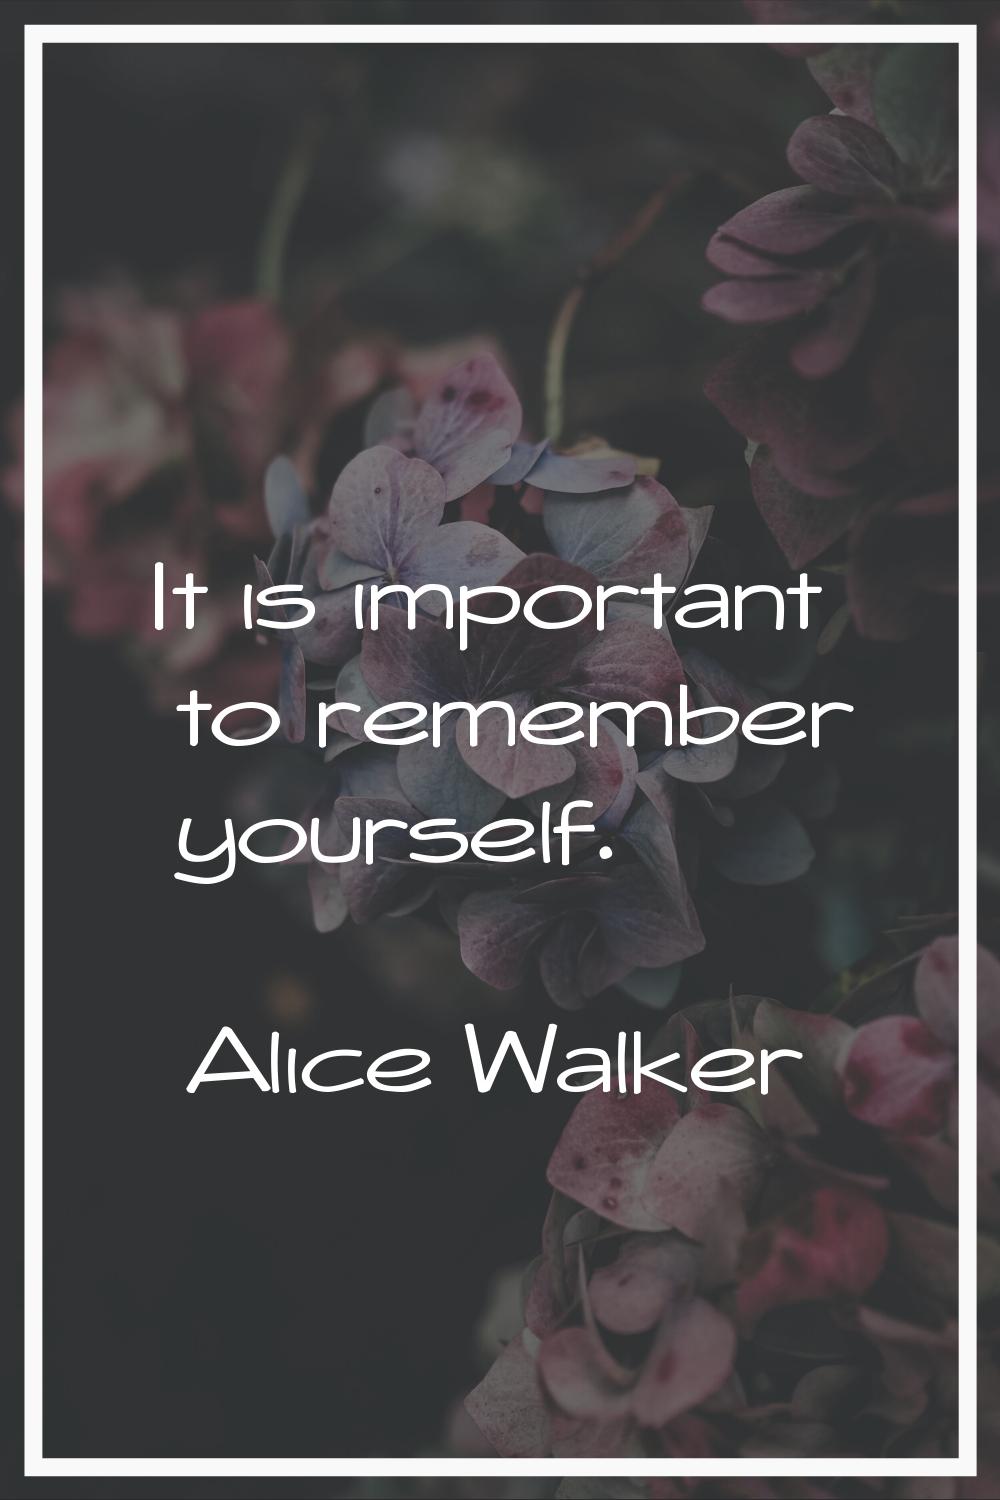 It is important to remember yourself.